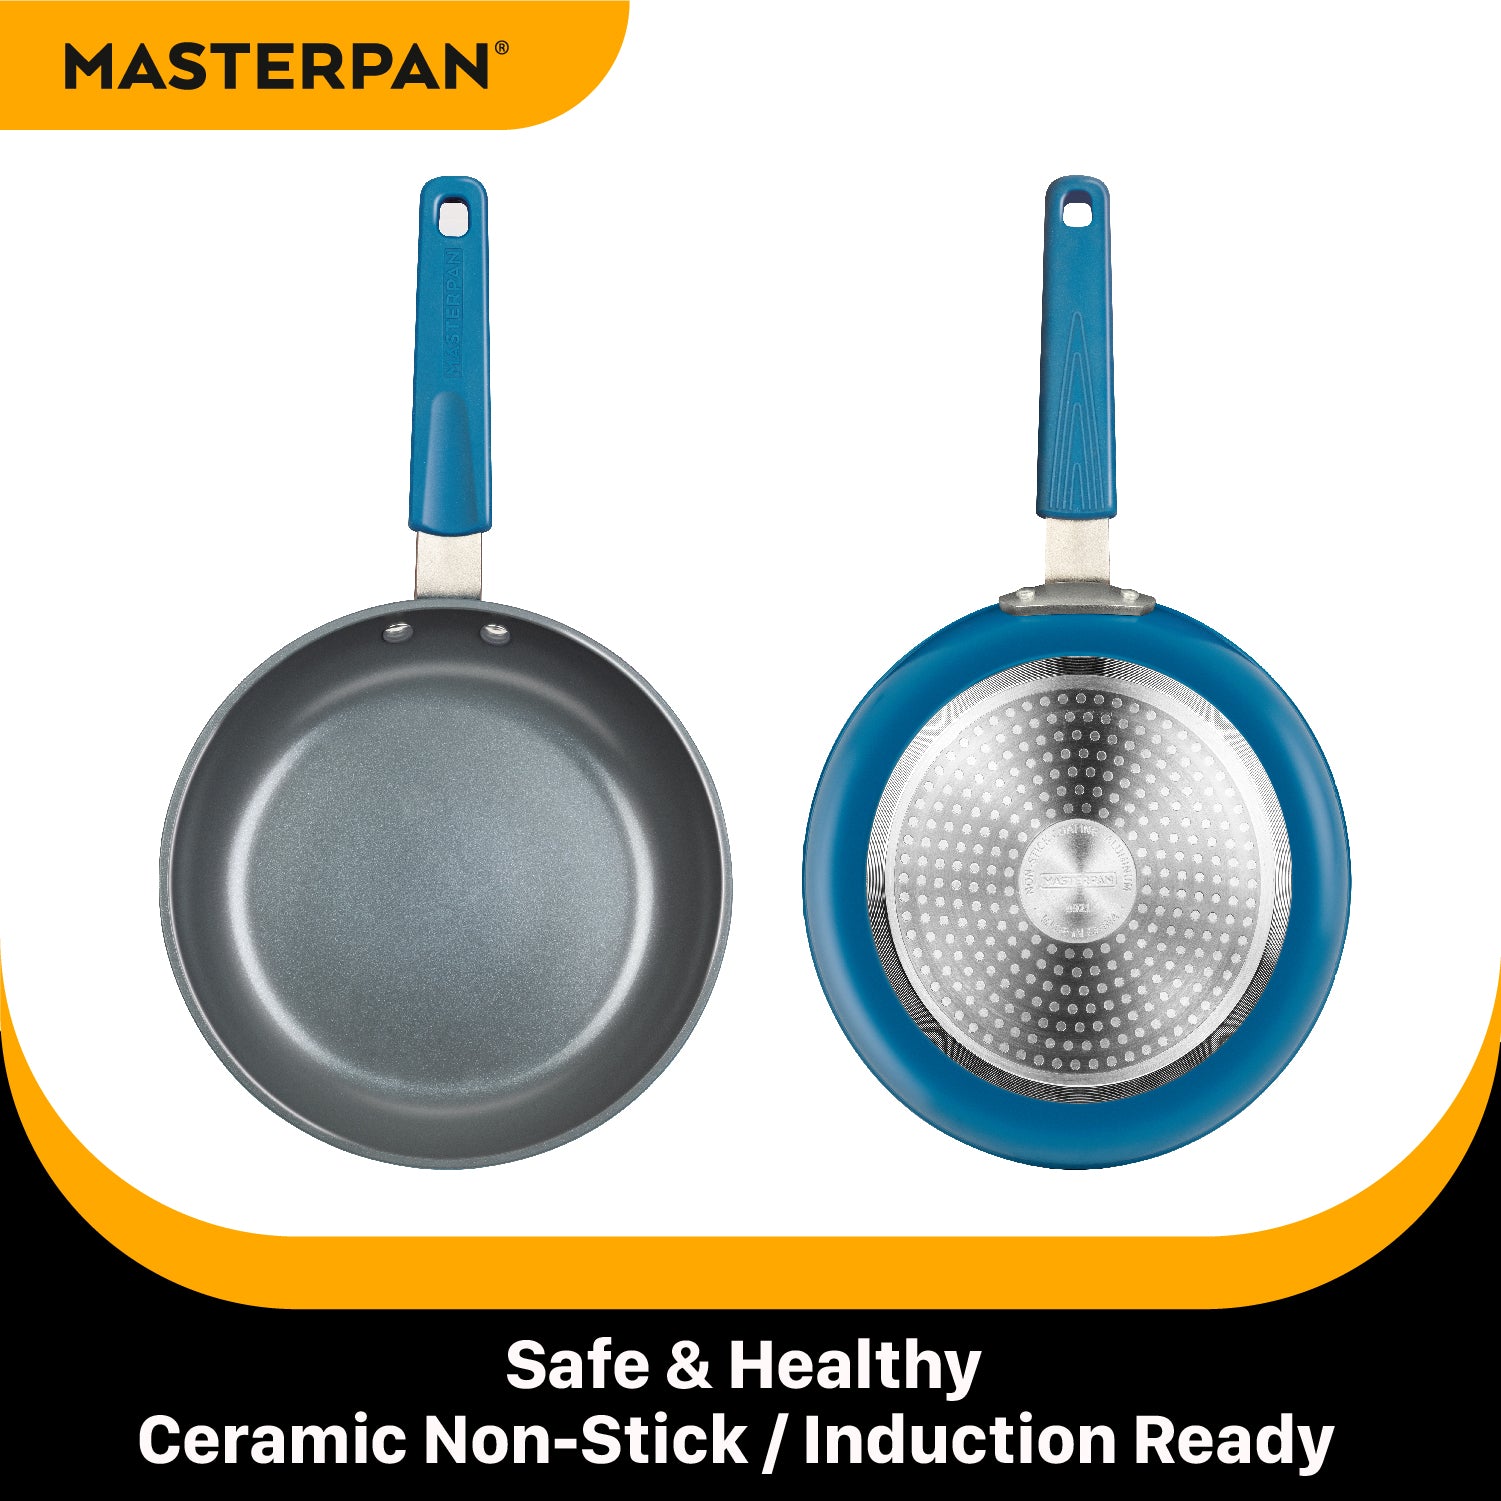 STOVETOP OVEN FRY PAN & SKILLET WITH HEAT-IN STEAM-OUT LID, HEALTHY CERAMIC NON-STICK ALUMINIUM WITH STAINLESS STEEL CHEF’S HANDLE, BONUS 2 UTENSILS AND FELT PAN PROTECTOR INCLUDED, 9.5” (24cm) - AZURE (7569C)